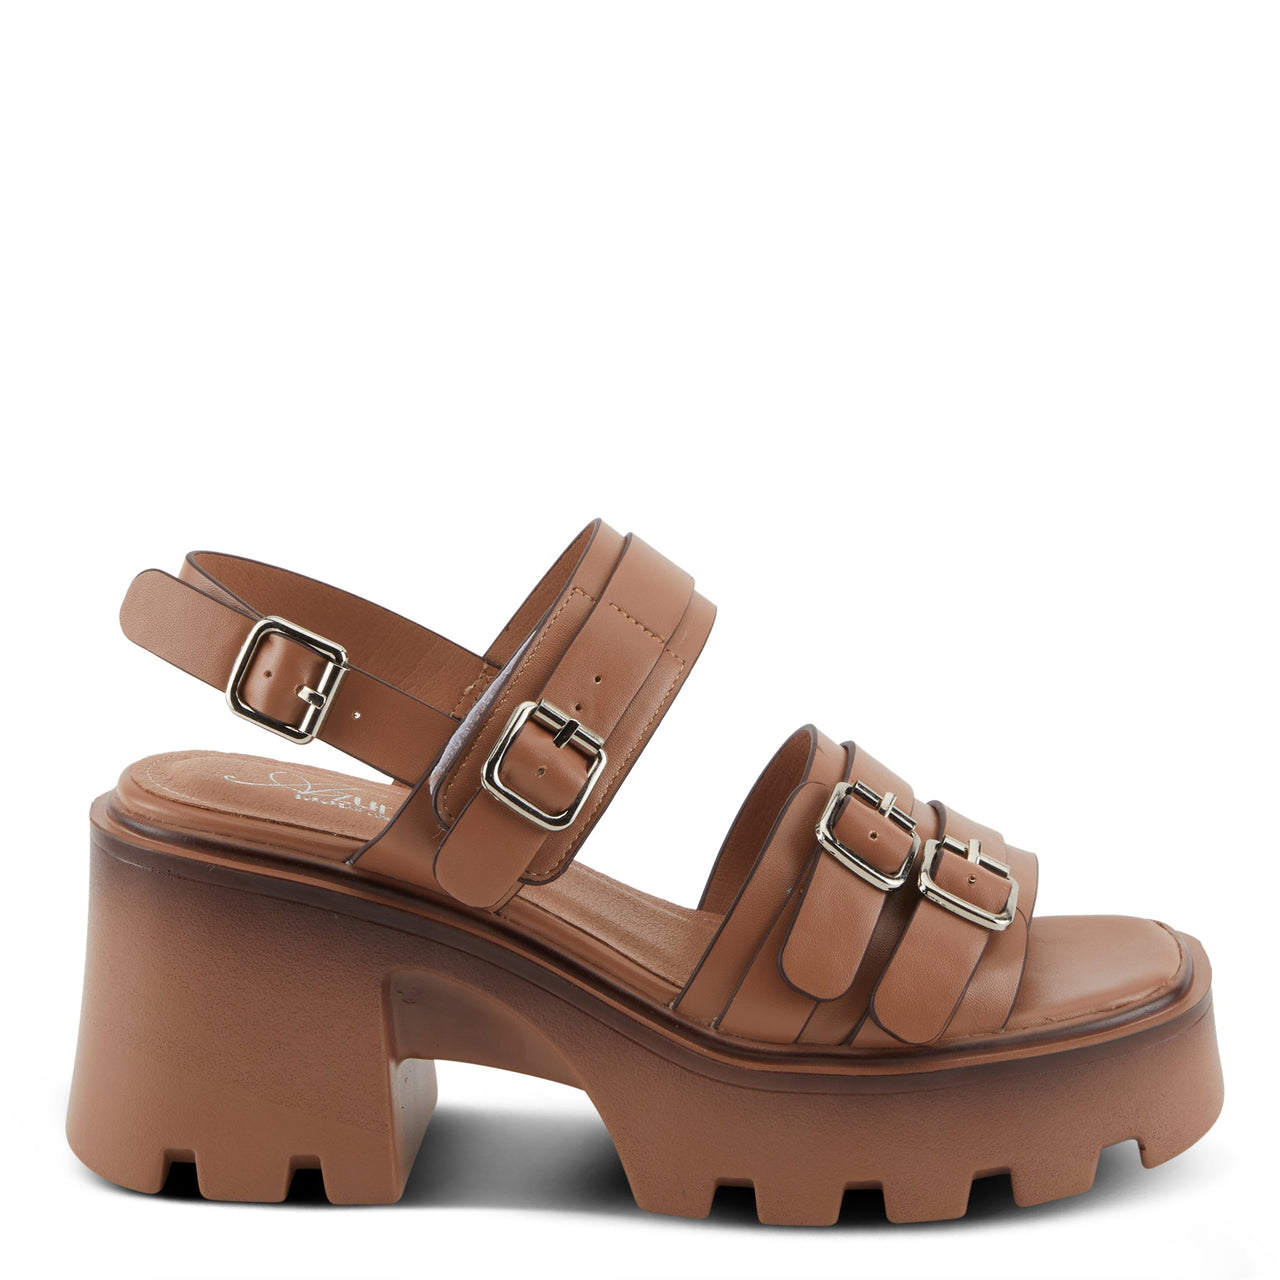 Spring Step Shoes Azura Cheekychic Sandals in maroon with breathable lining